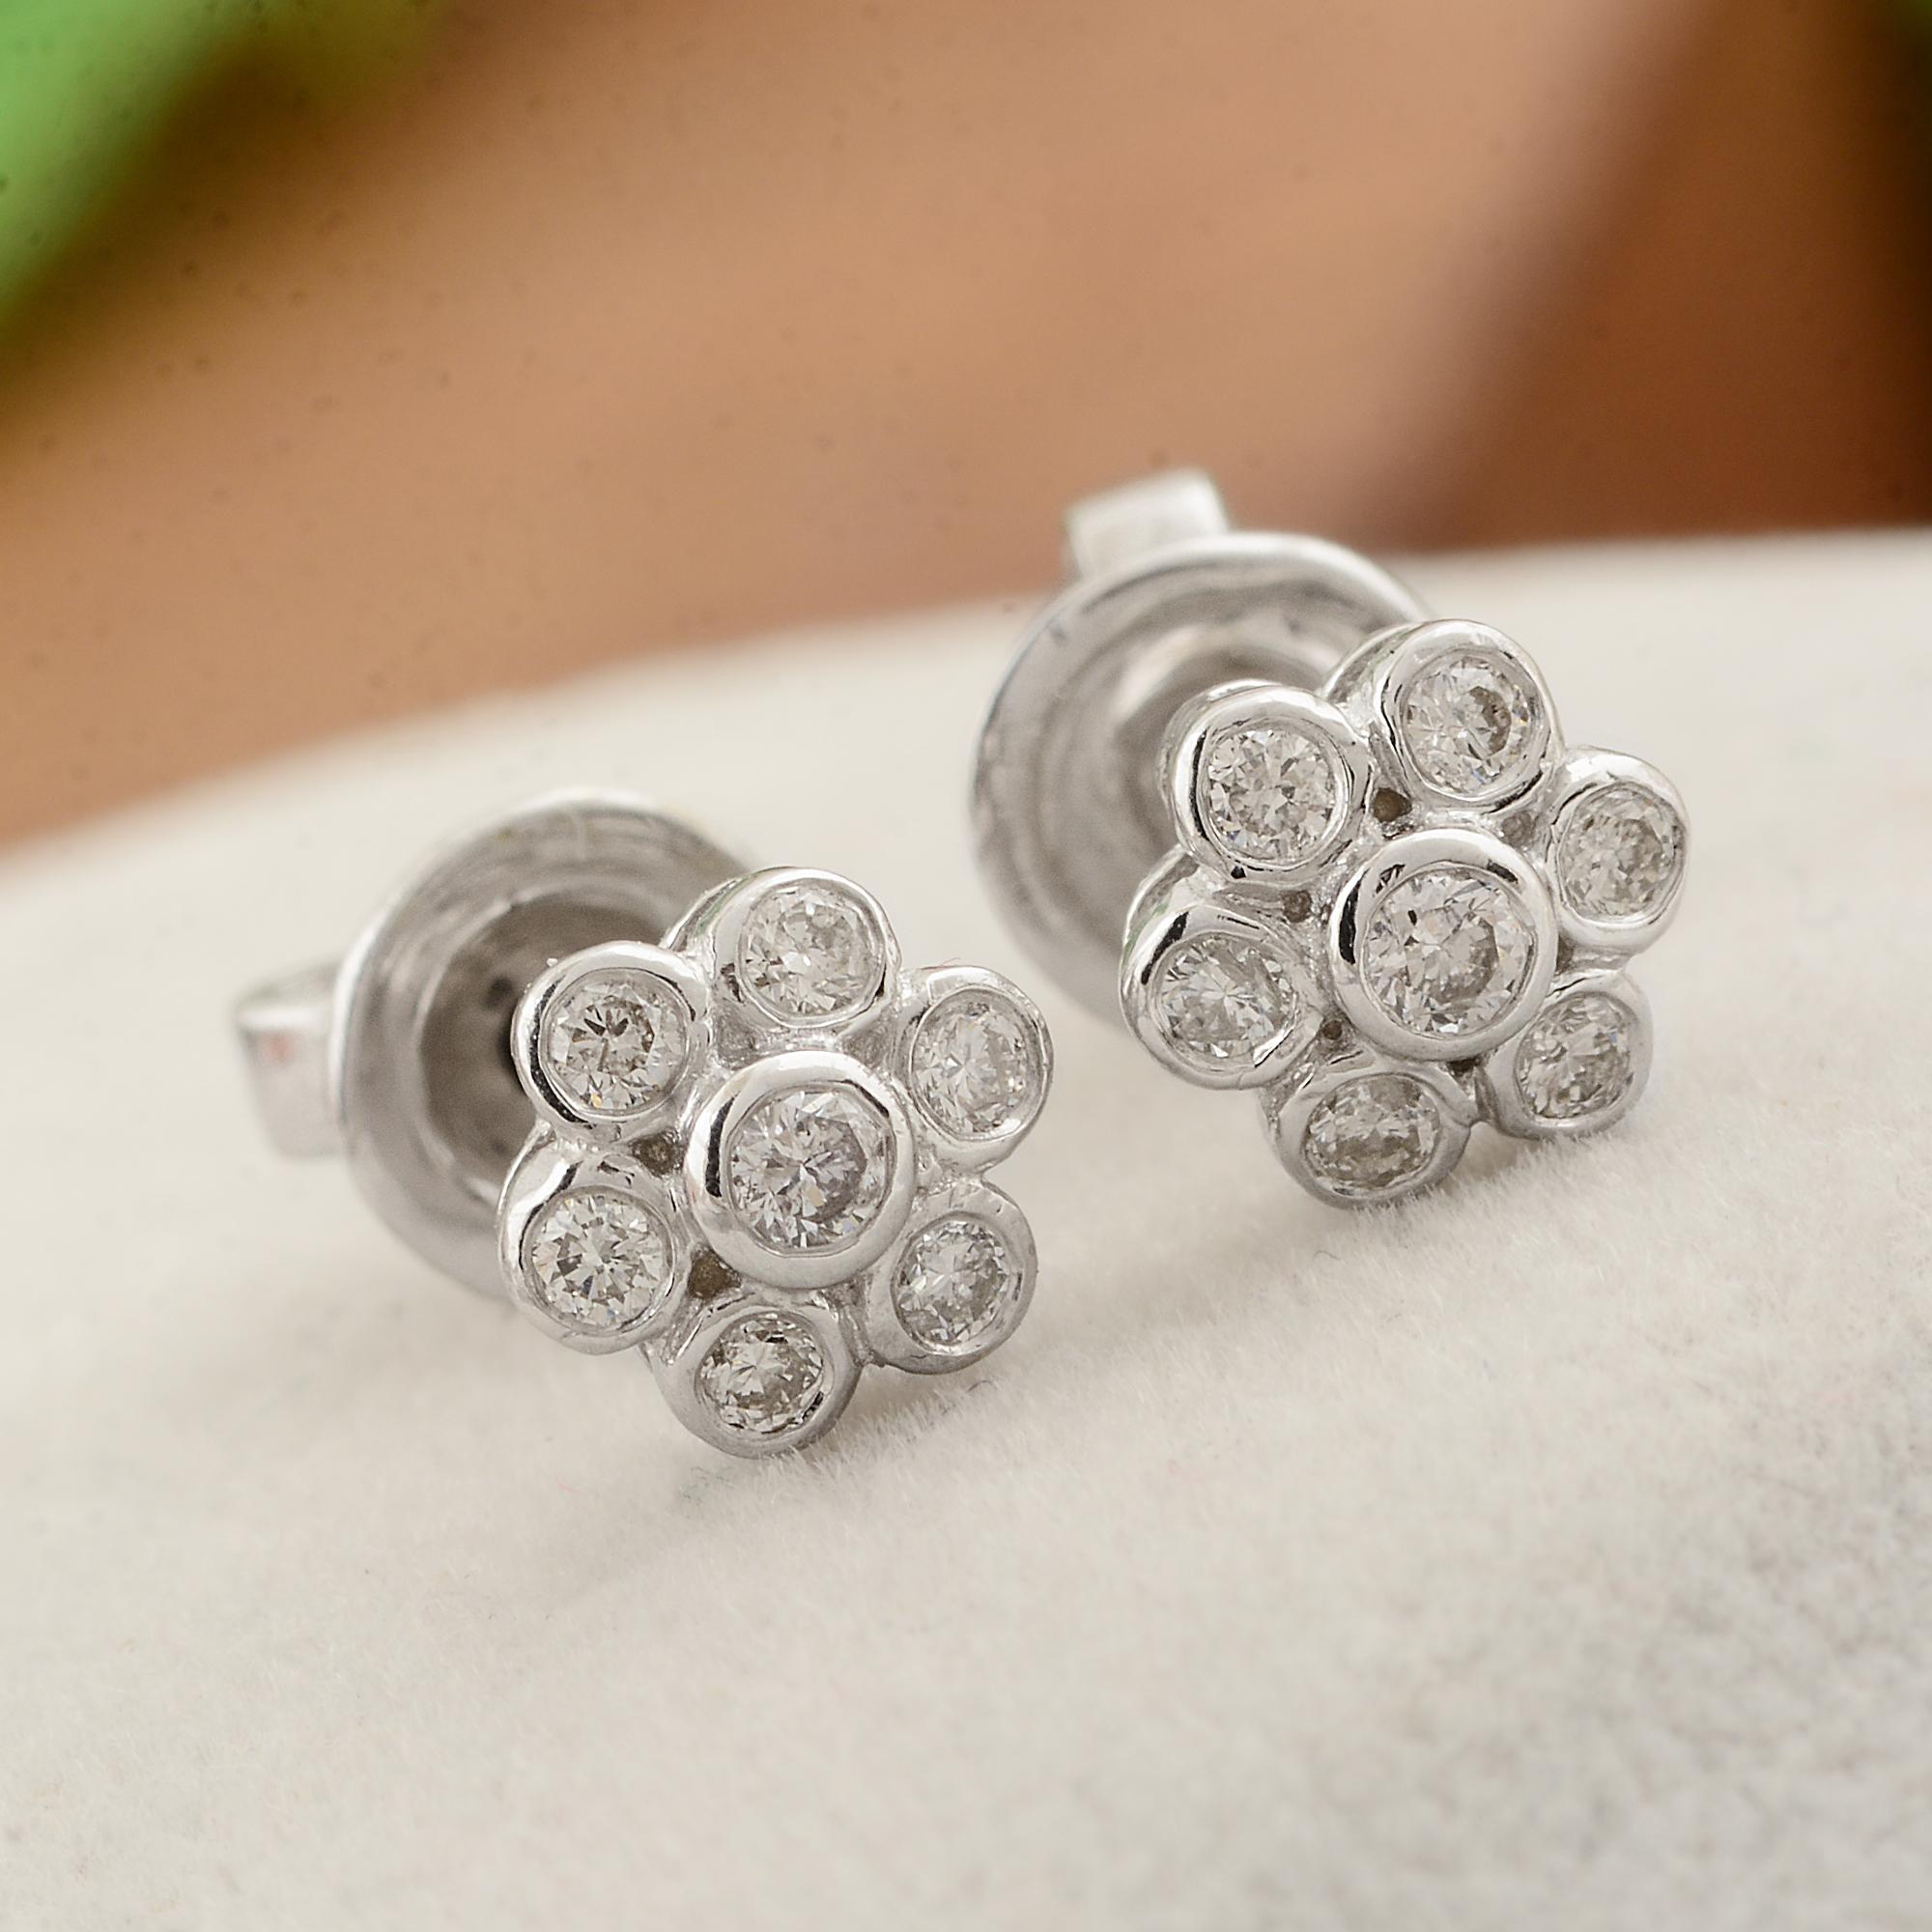 Elevate your ensemble with the enchanting beauty of these Natural SI Clarity HI Color Diamond Flower Stud Earrings, delicately crafted in lustrous 10 Karat White Gold. These exquisite earrings are a celebration of nature's beauty and timeless